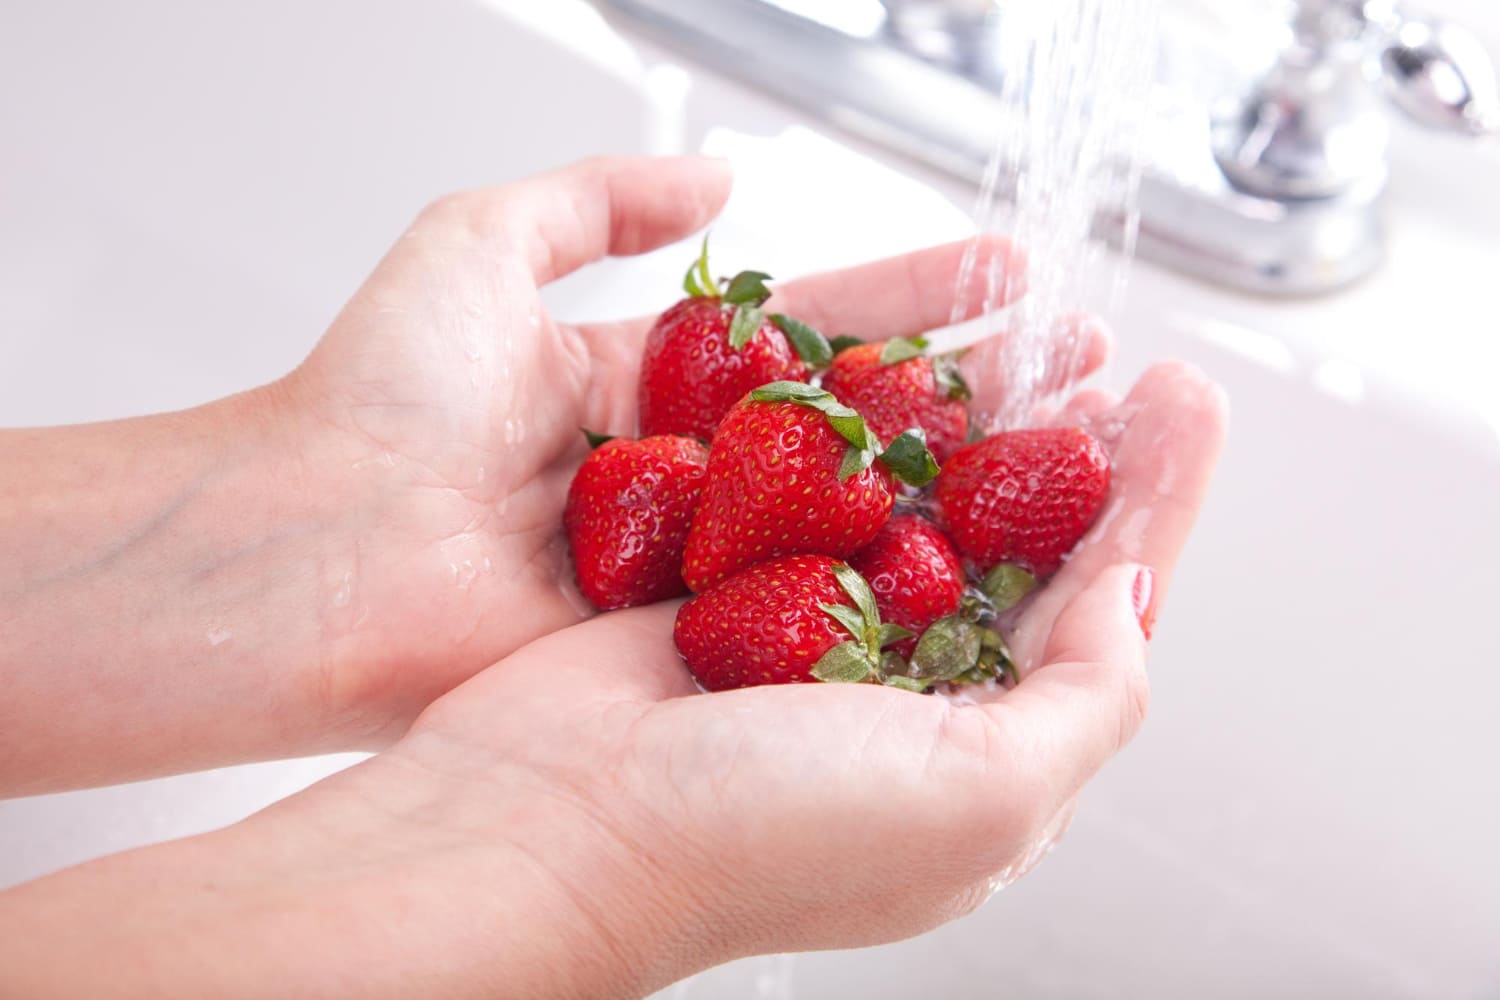 How to wash strawberries